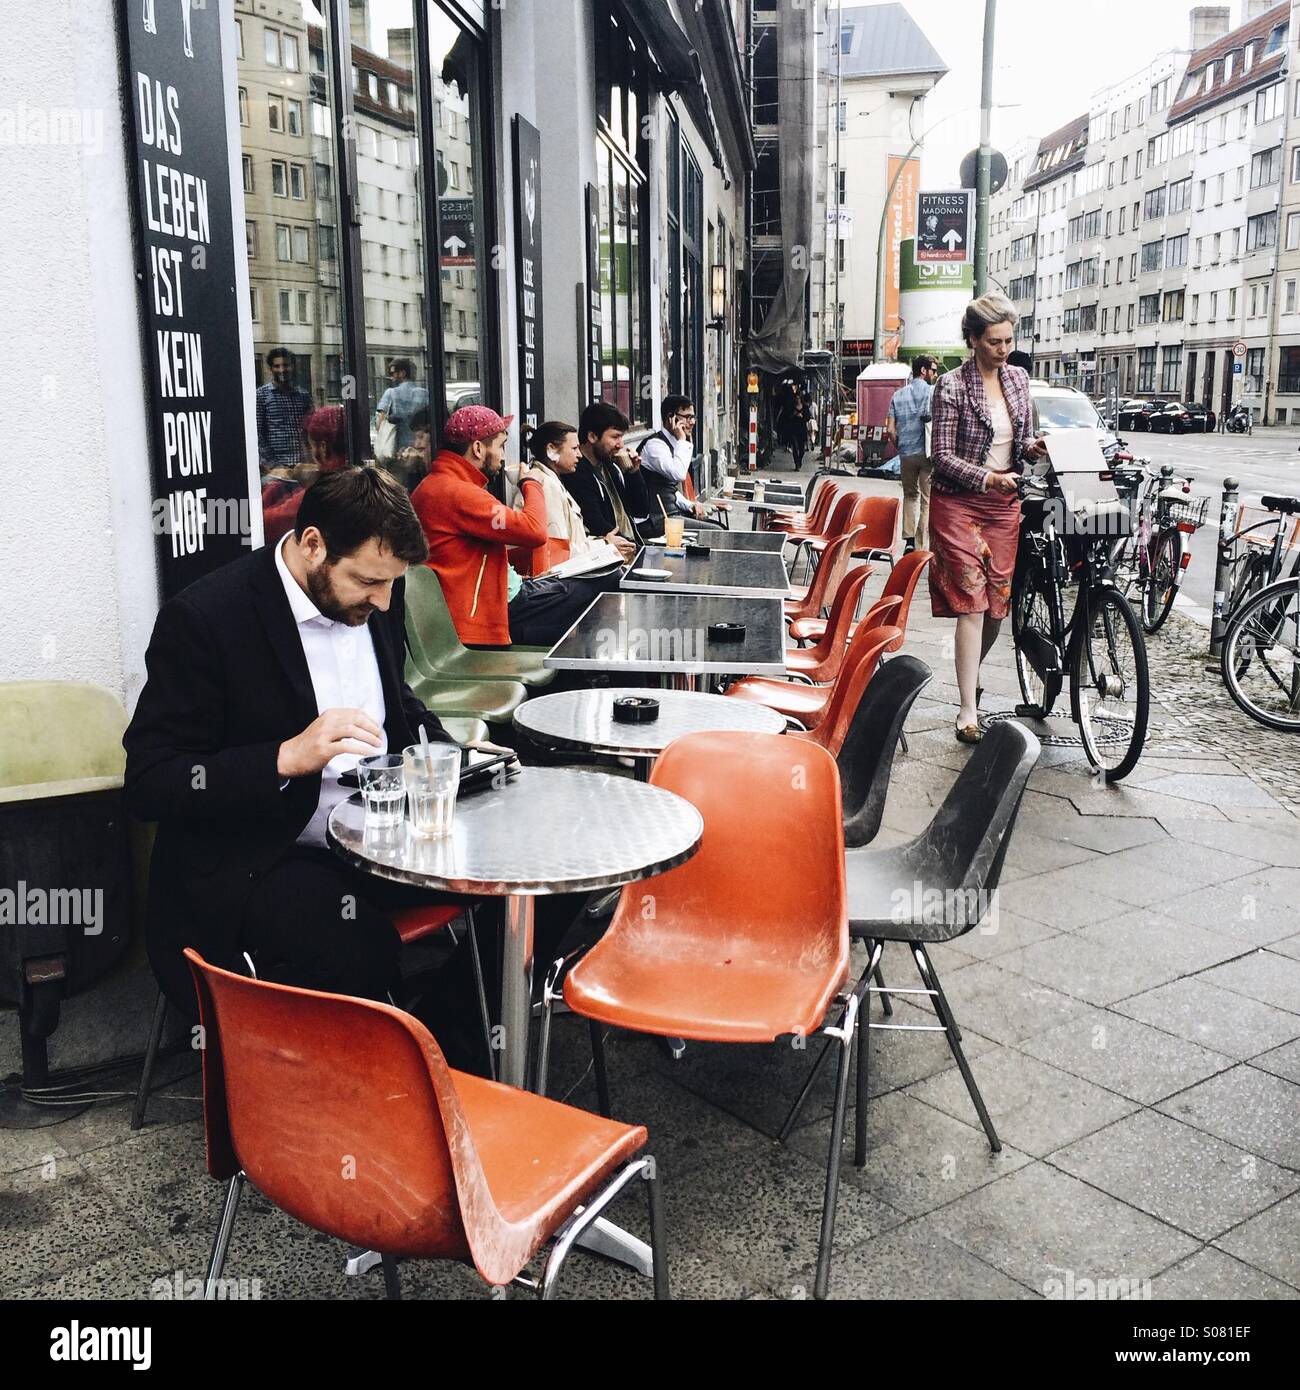 People sitting at outdoor tables at St Oberholz cafe on corner of Torstrasse and Rosenthaler Strasse, Mitte, Berlin, Germany Stock Photo